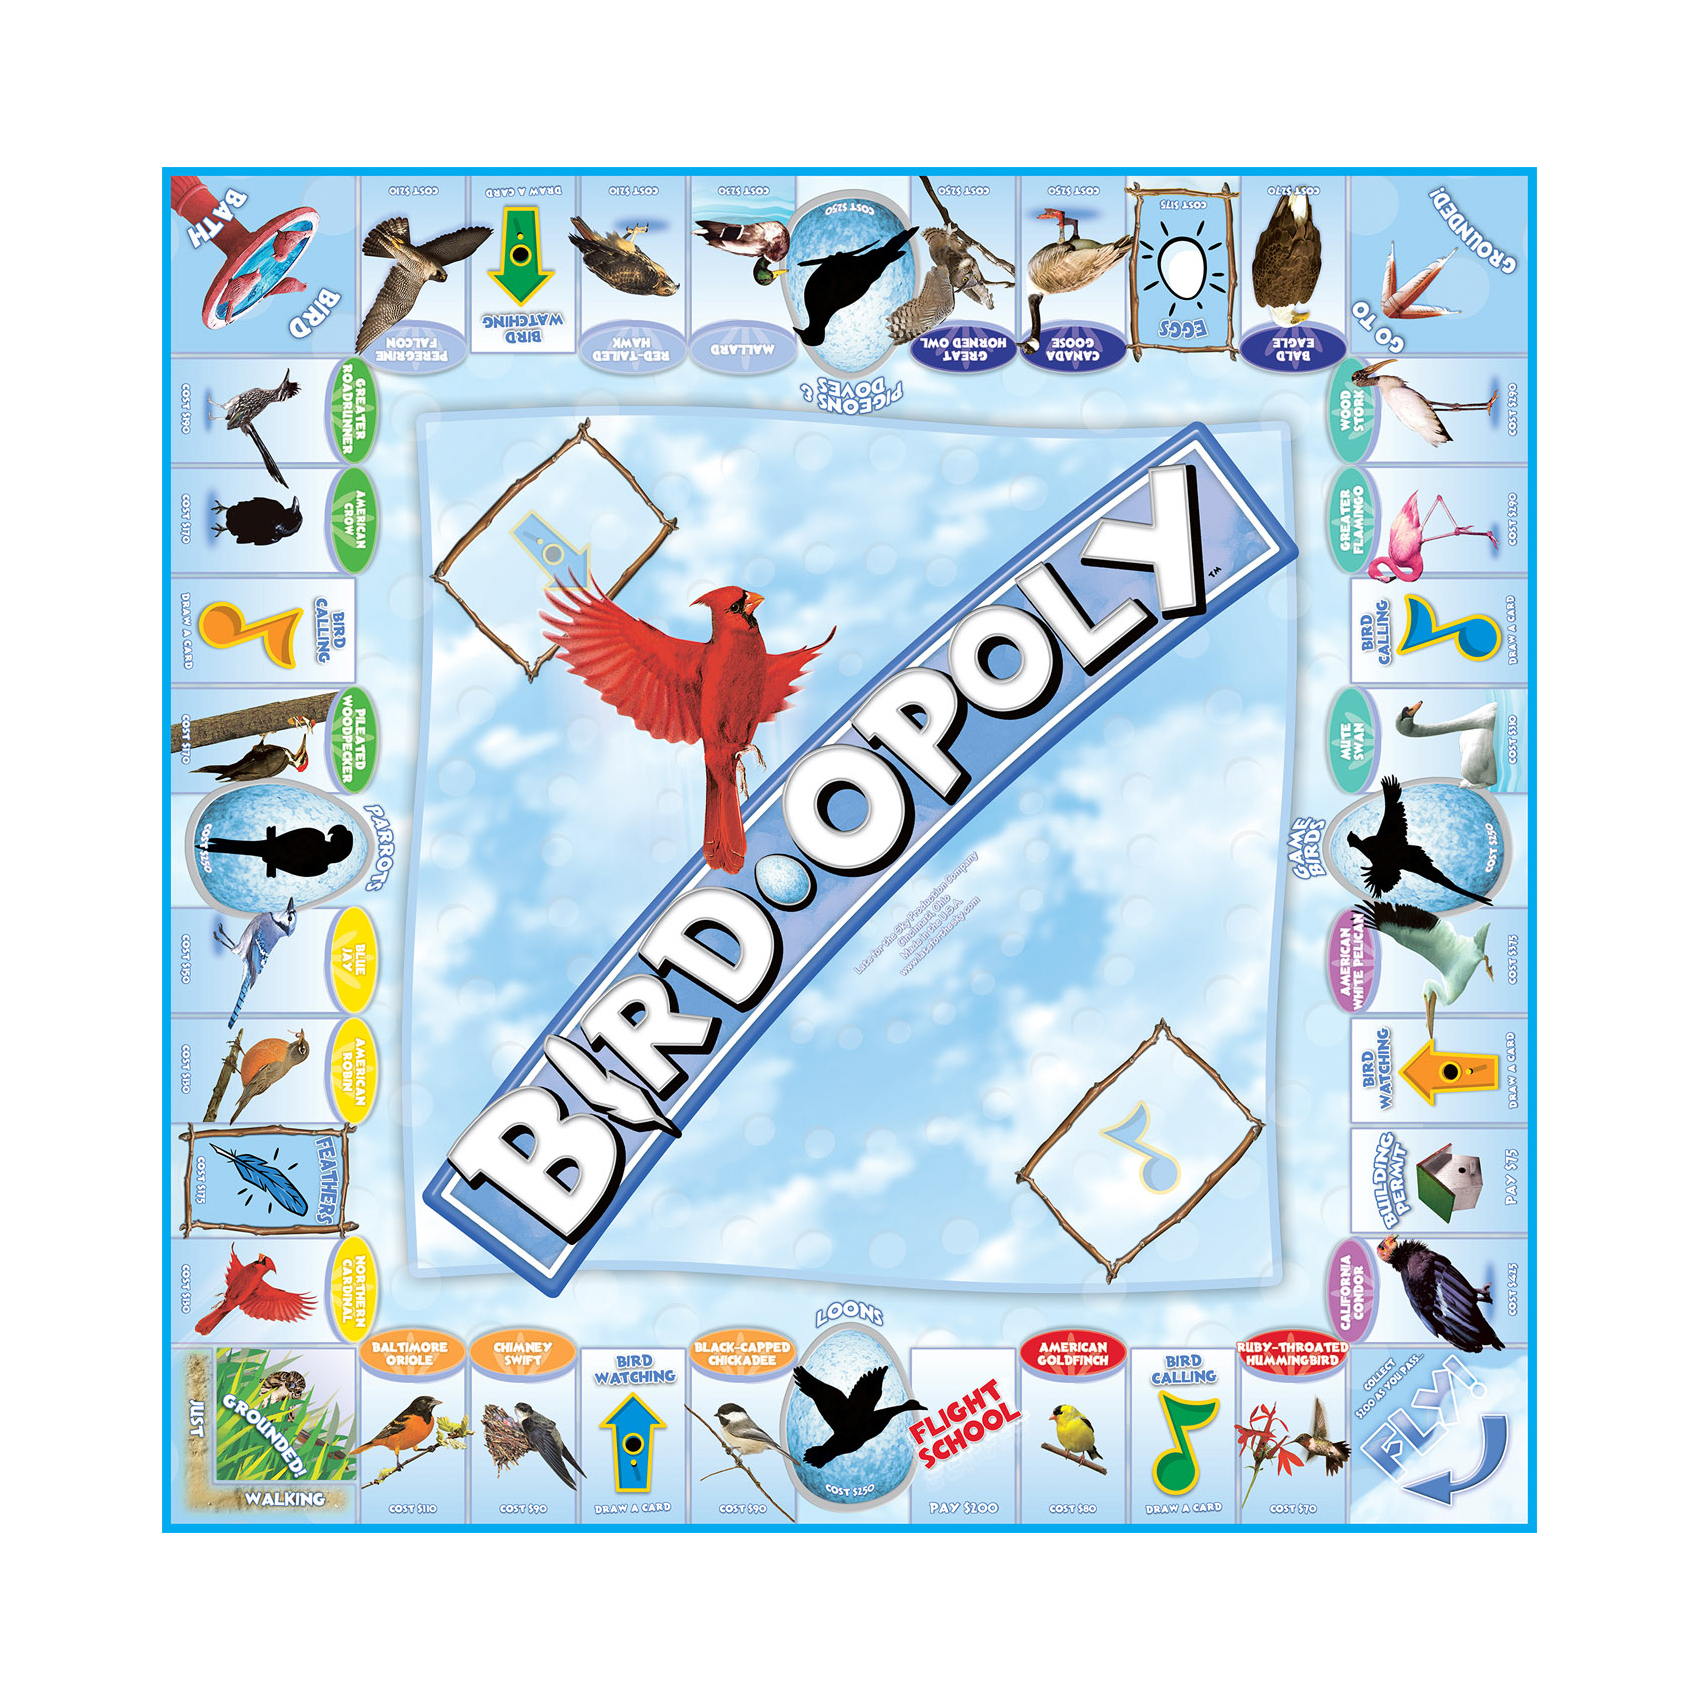 Bird-Opoly Board Game offered by Distribution Solutions - image 2 of 2